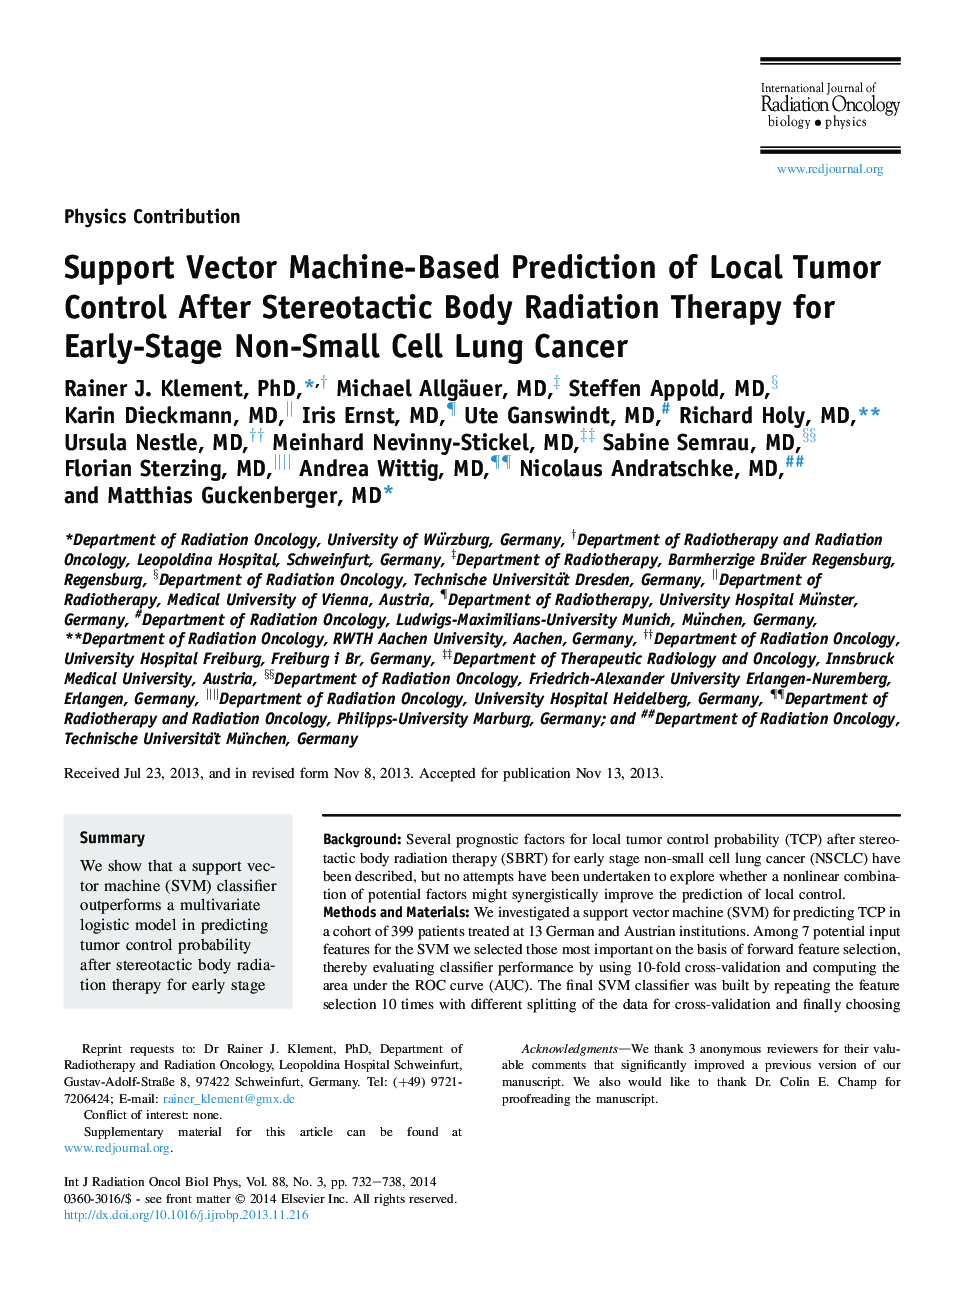 Support Vector Machine-Based Prediction of Local Tumor Control After Stereotactic Body Radiation Therapy for Early-Stage Non-Small Cell Lung Cancer